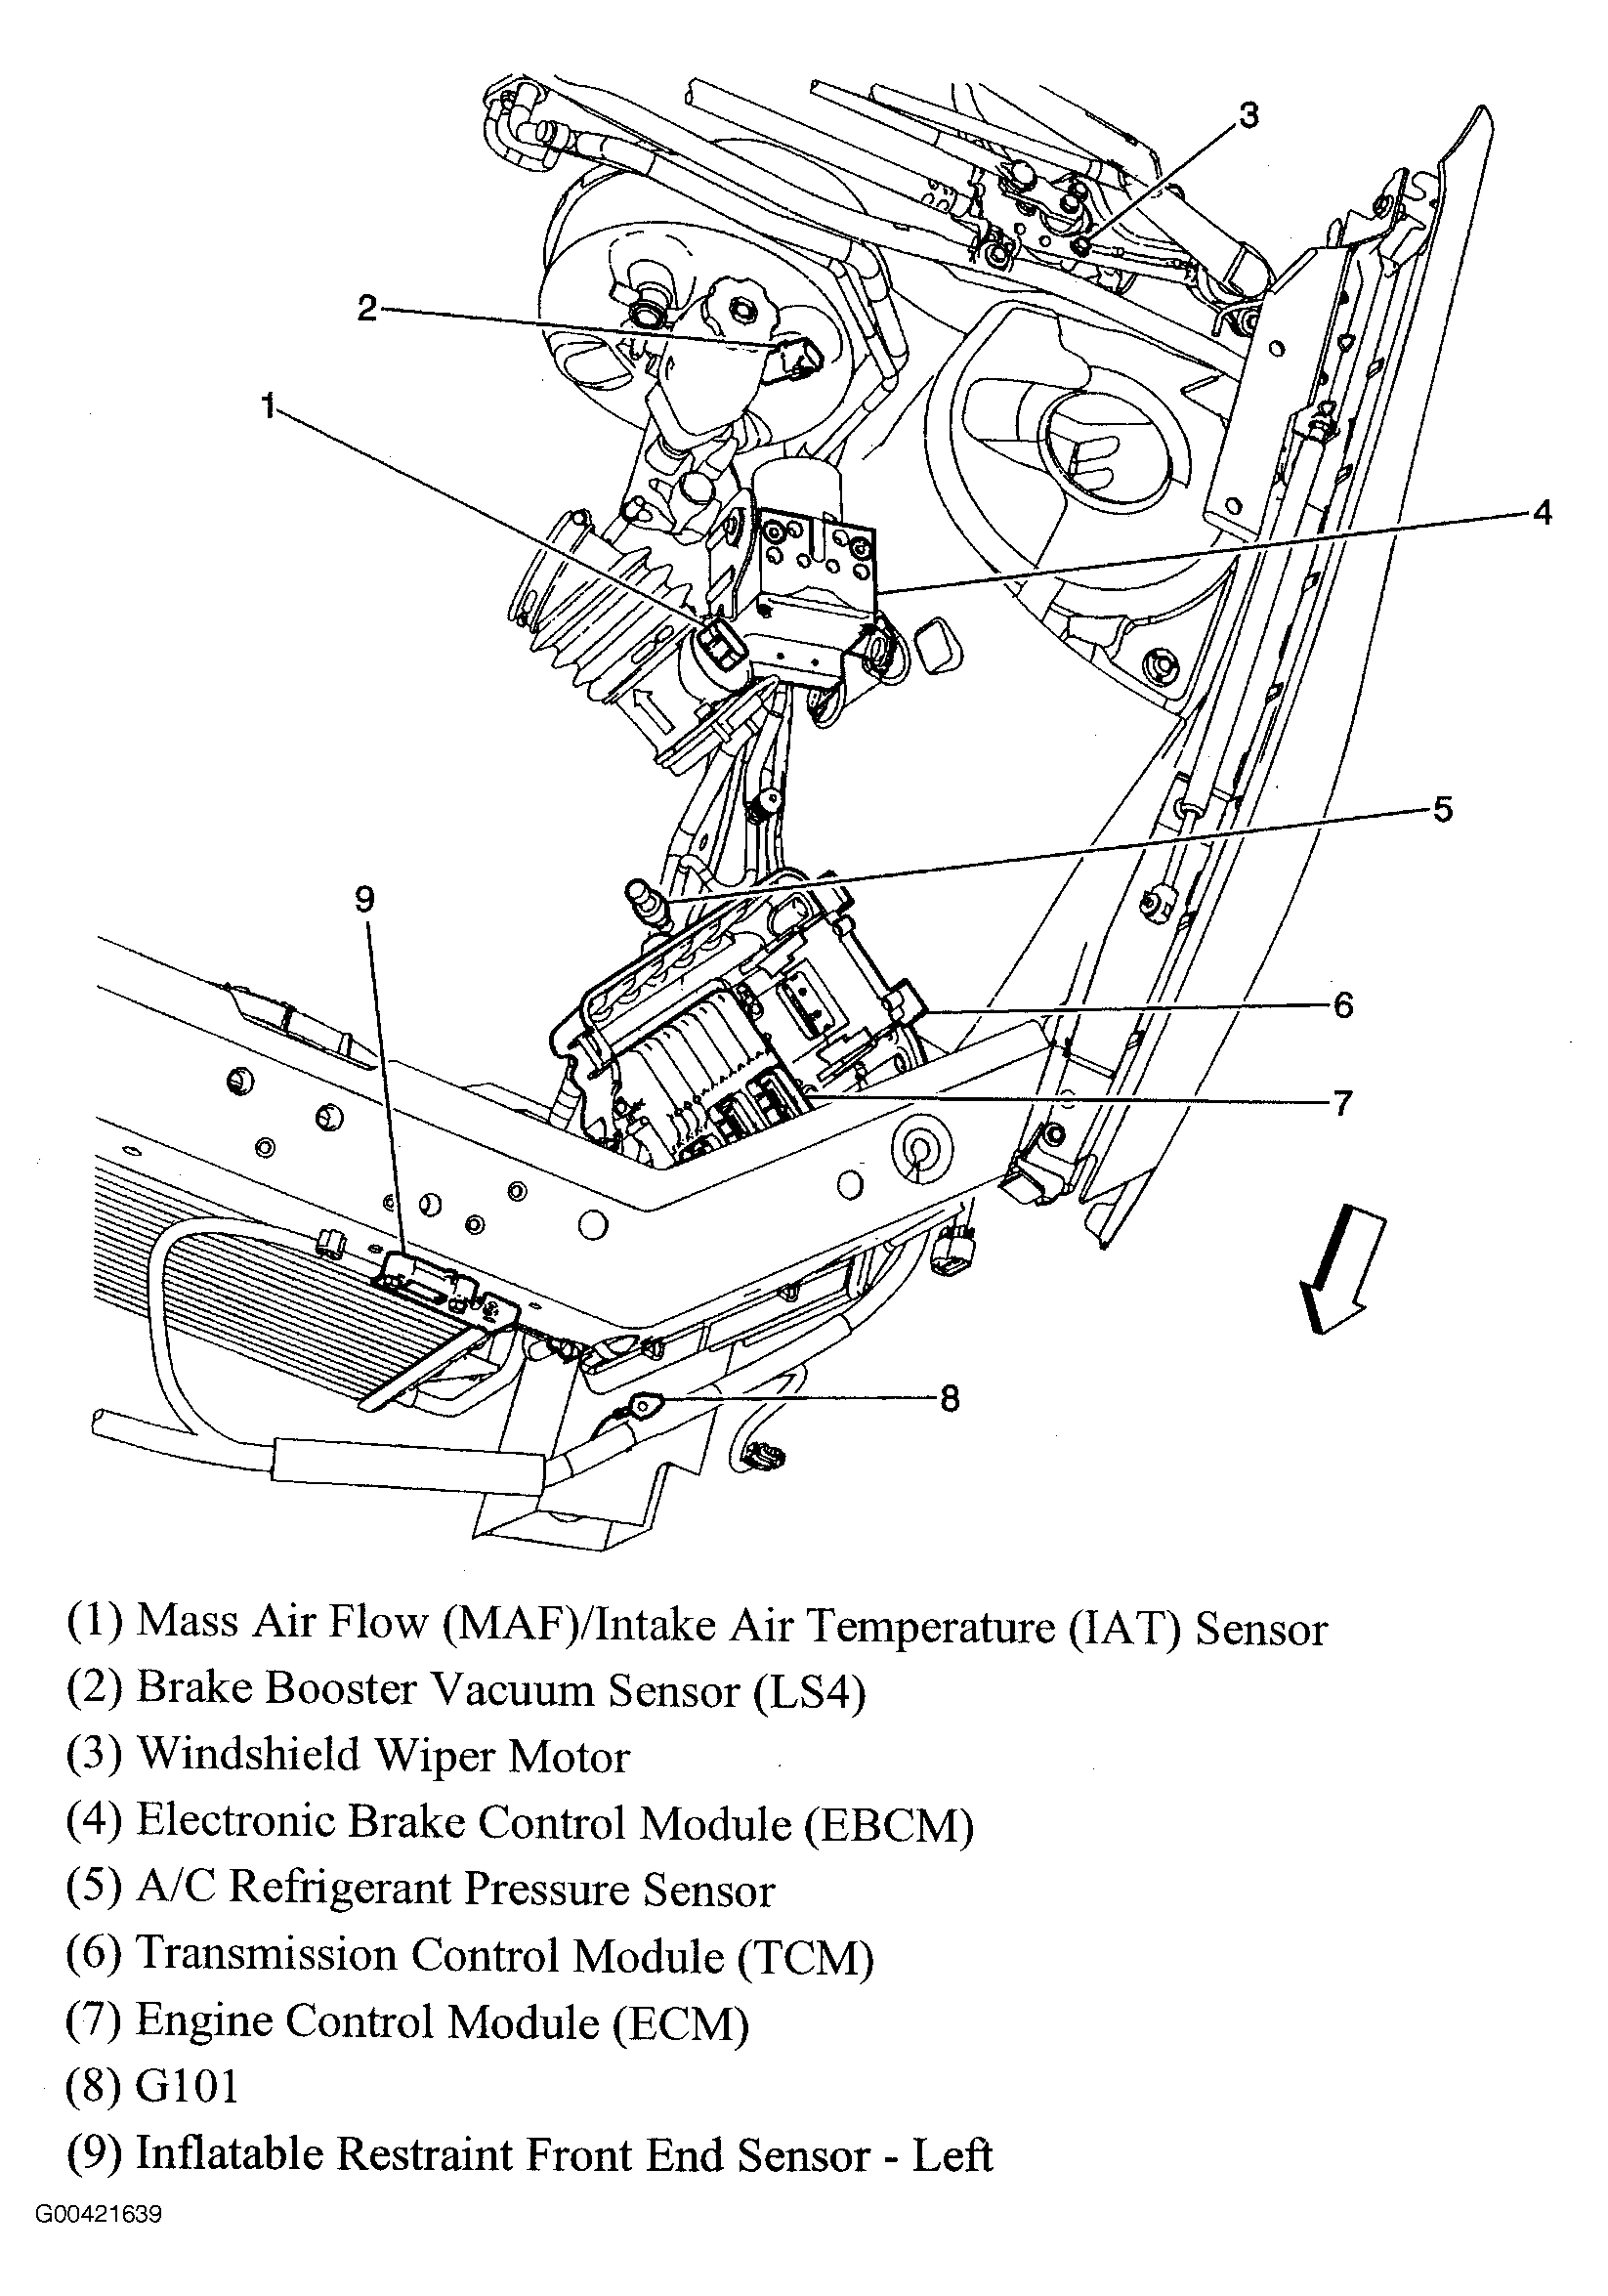 Chevrolet Monte Carlo LTZ 2006 - Component Locations -  Left Front Of Engine Compartment